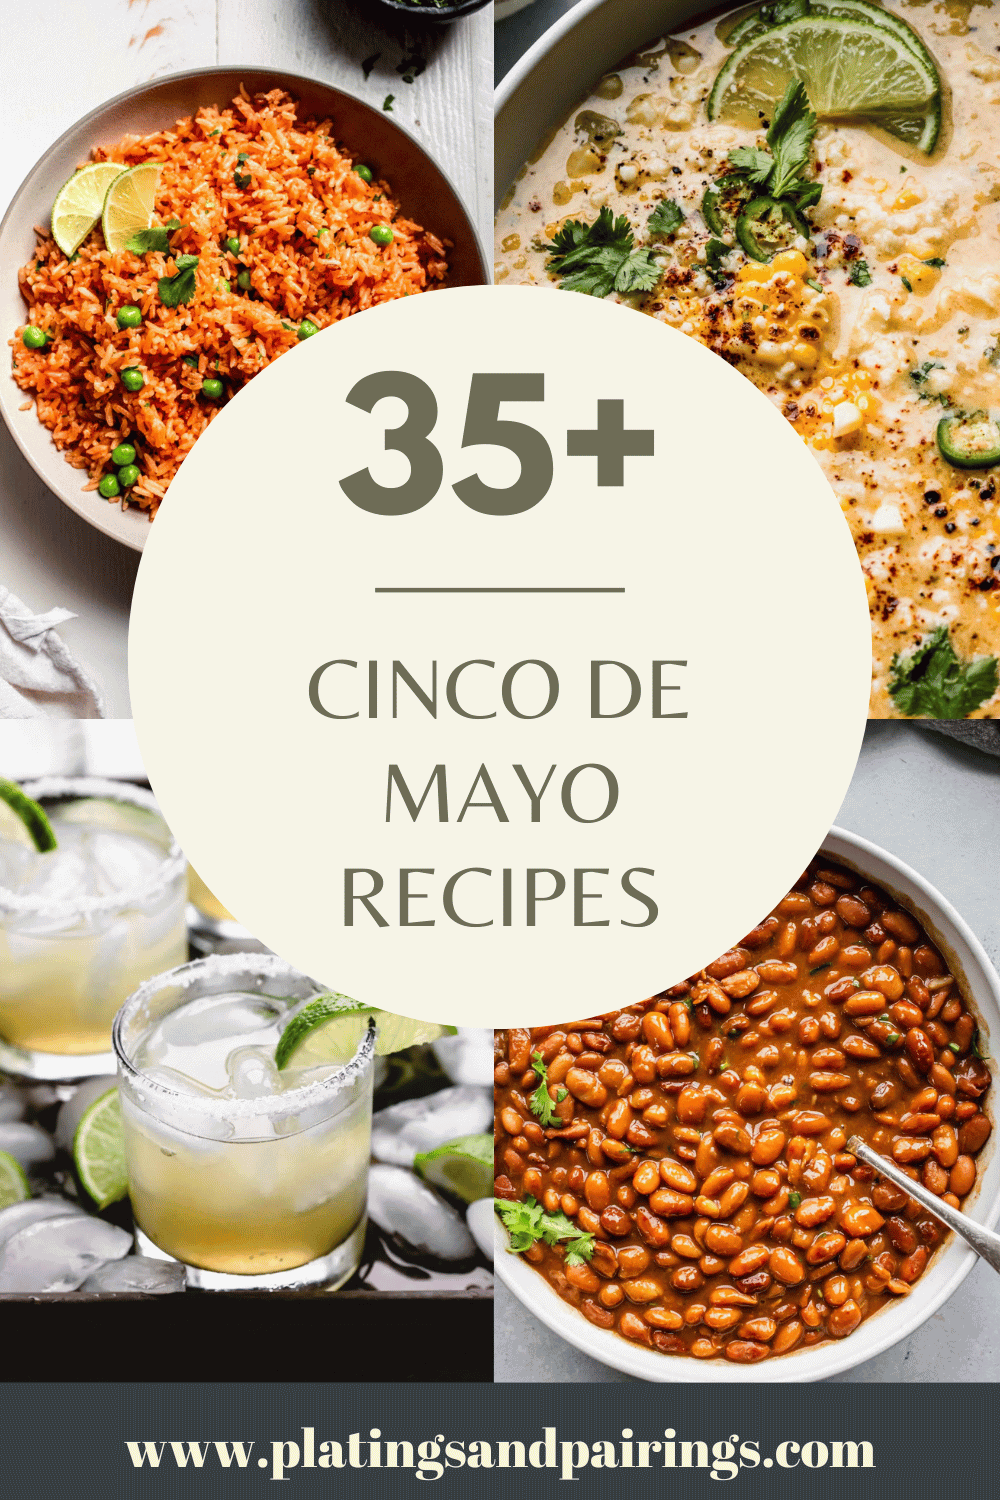 COLLAGE OF CINCO DE MAYO DISHES WITH TEXT OVERLAY.